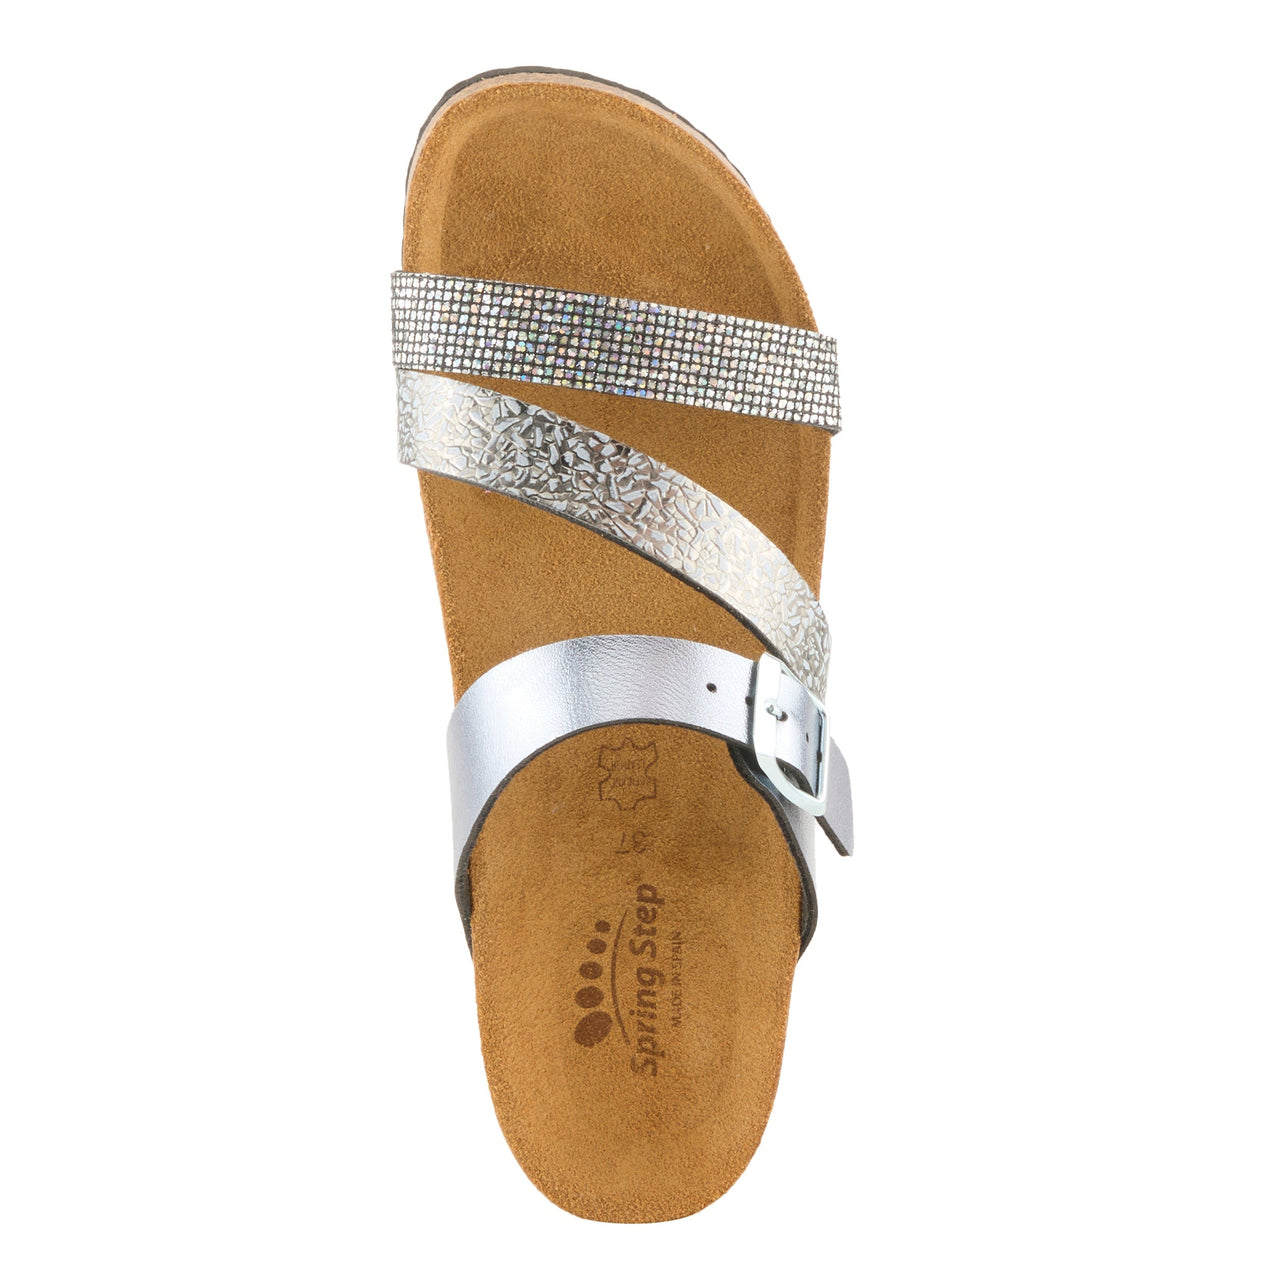 Versatile Spring Step Arenall Sandals in multi-color leather with cork-inspired wedge